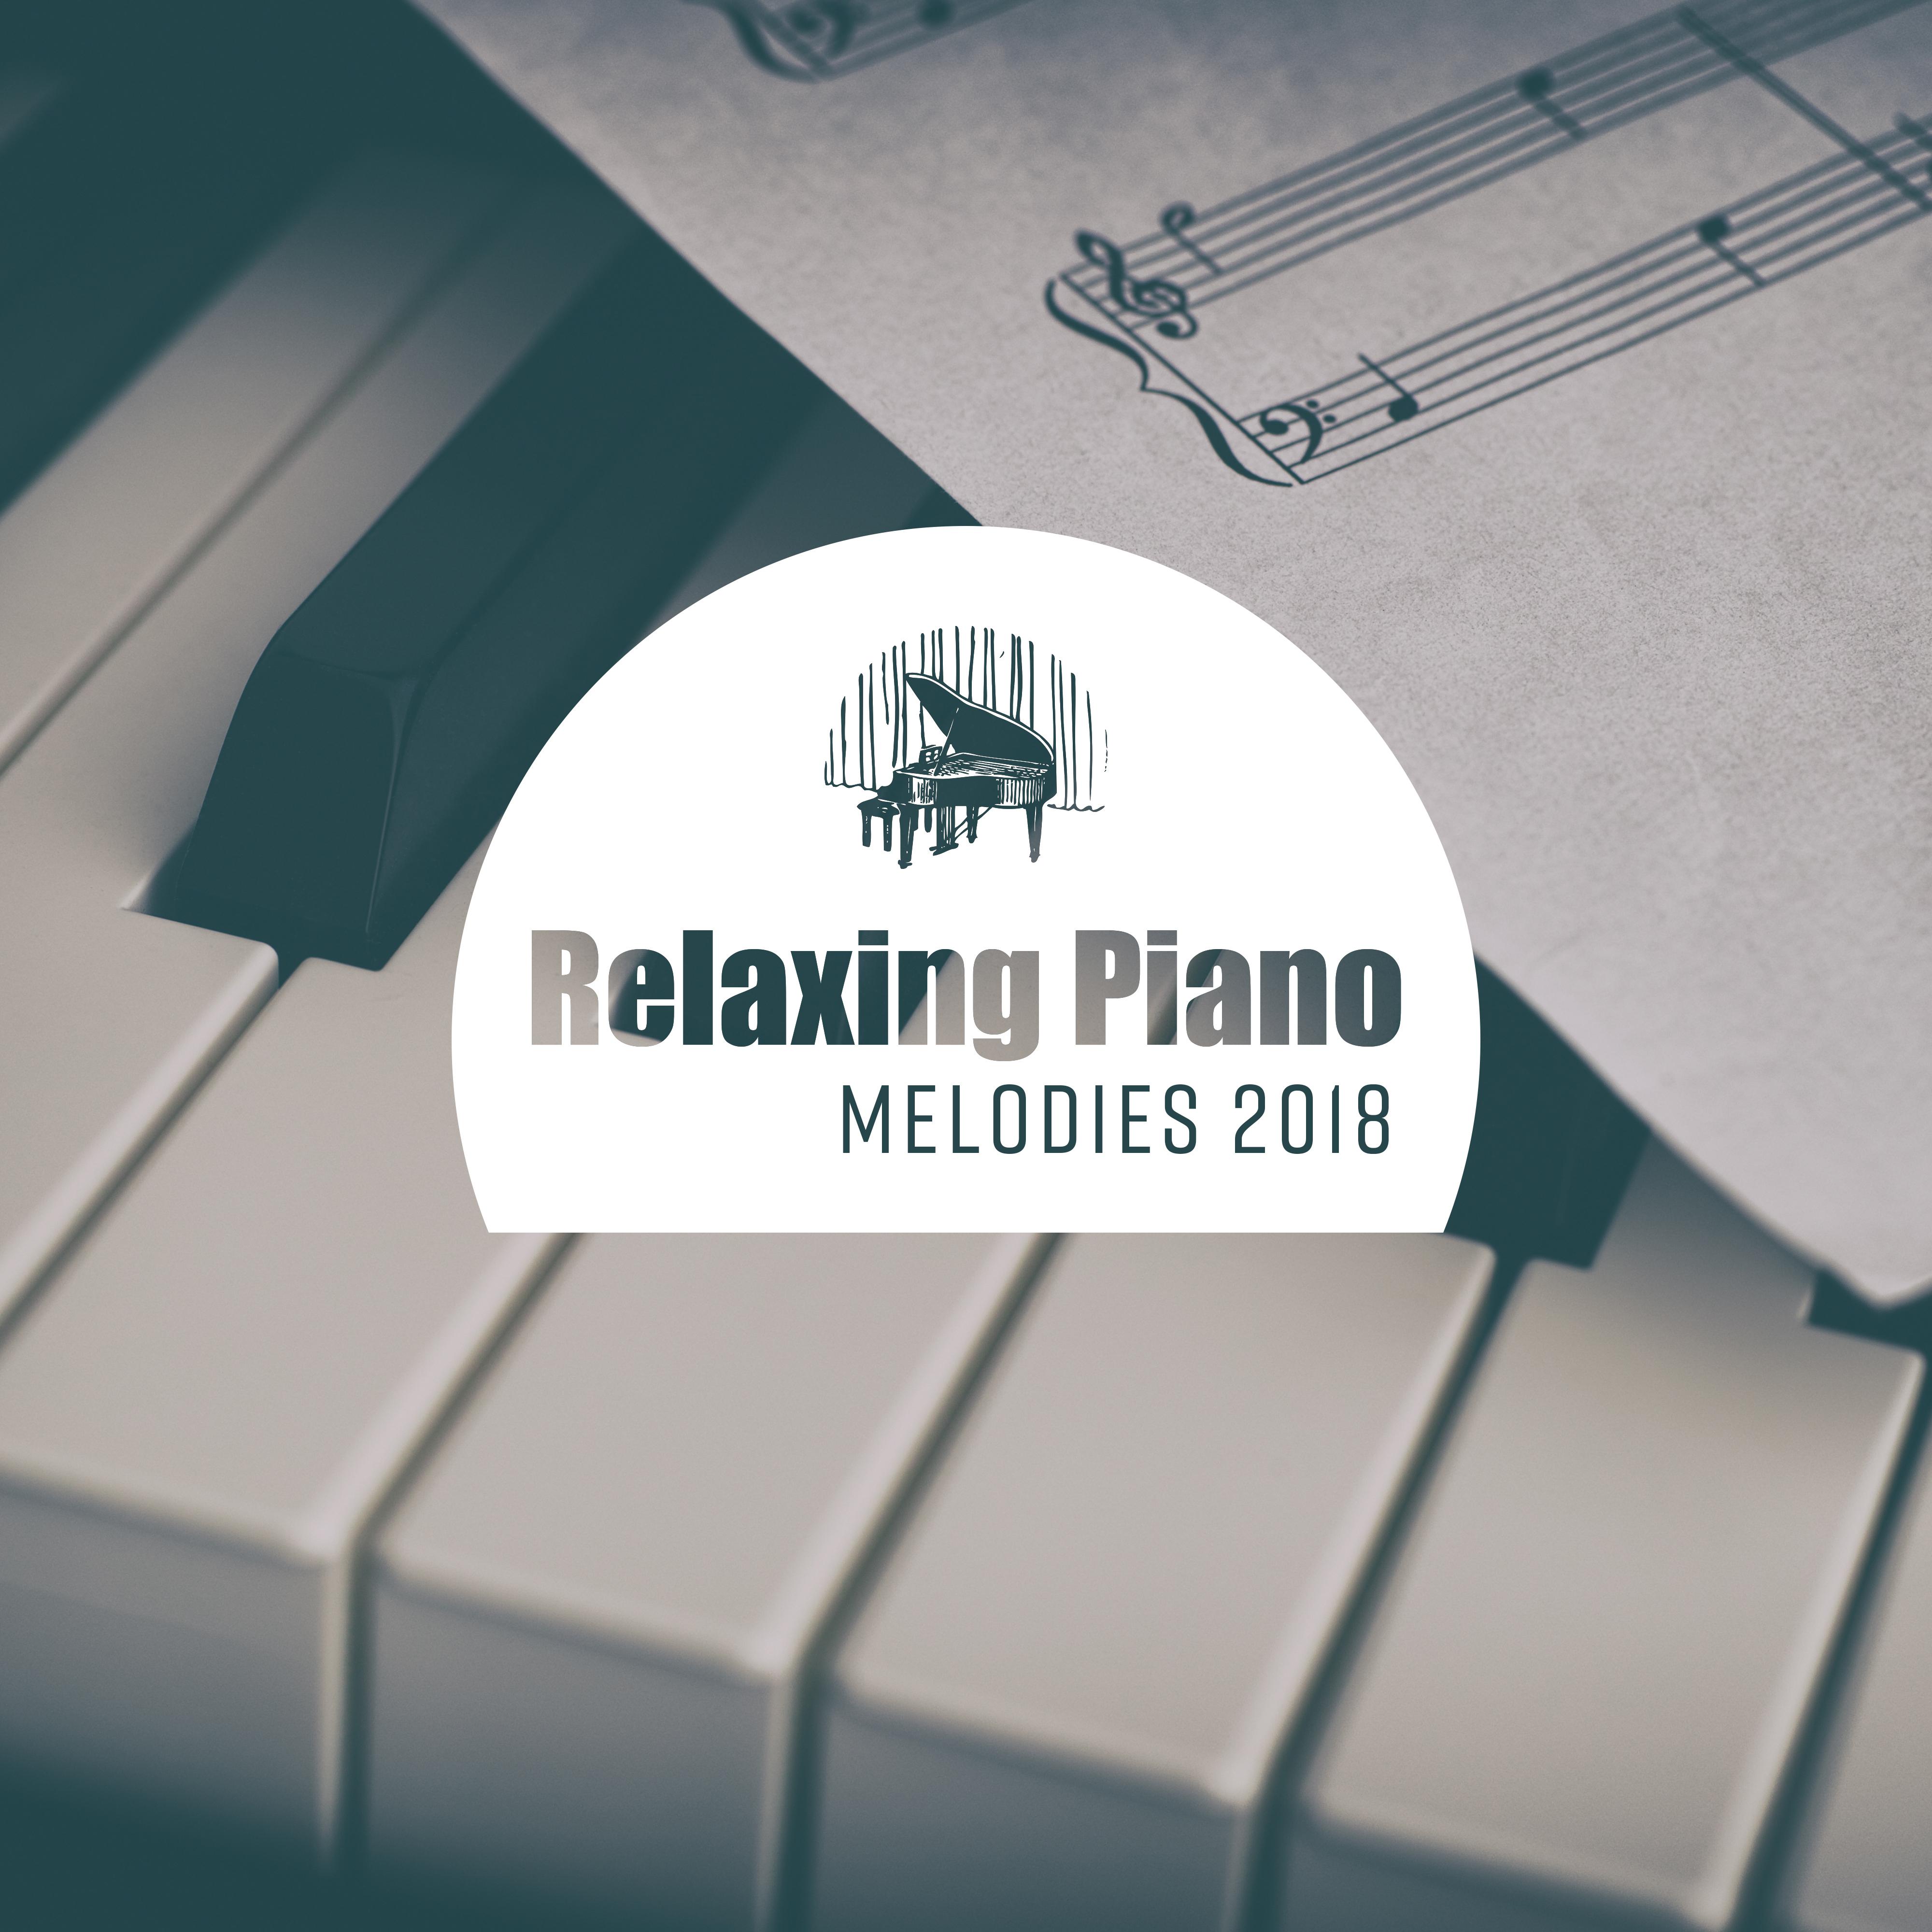 Relaxing Piano Melodies 2018